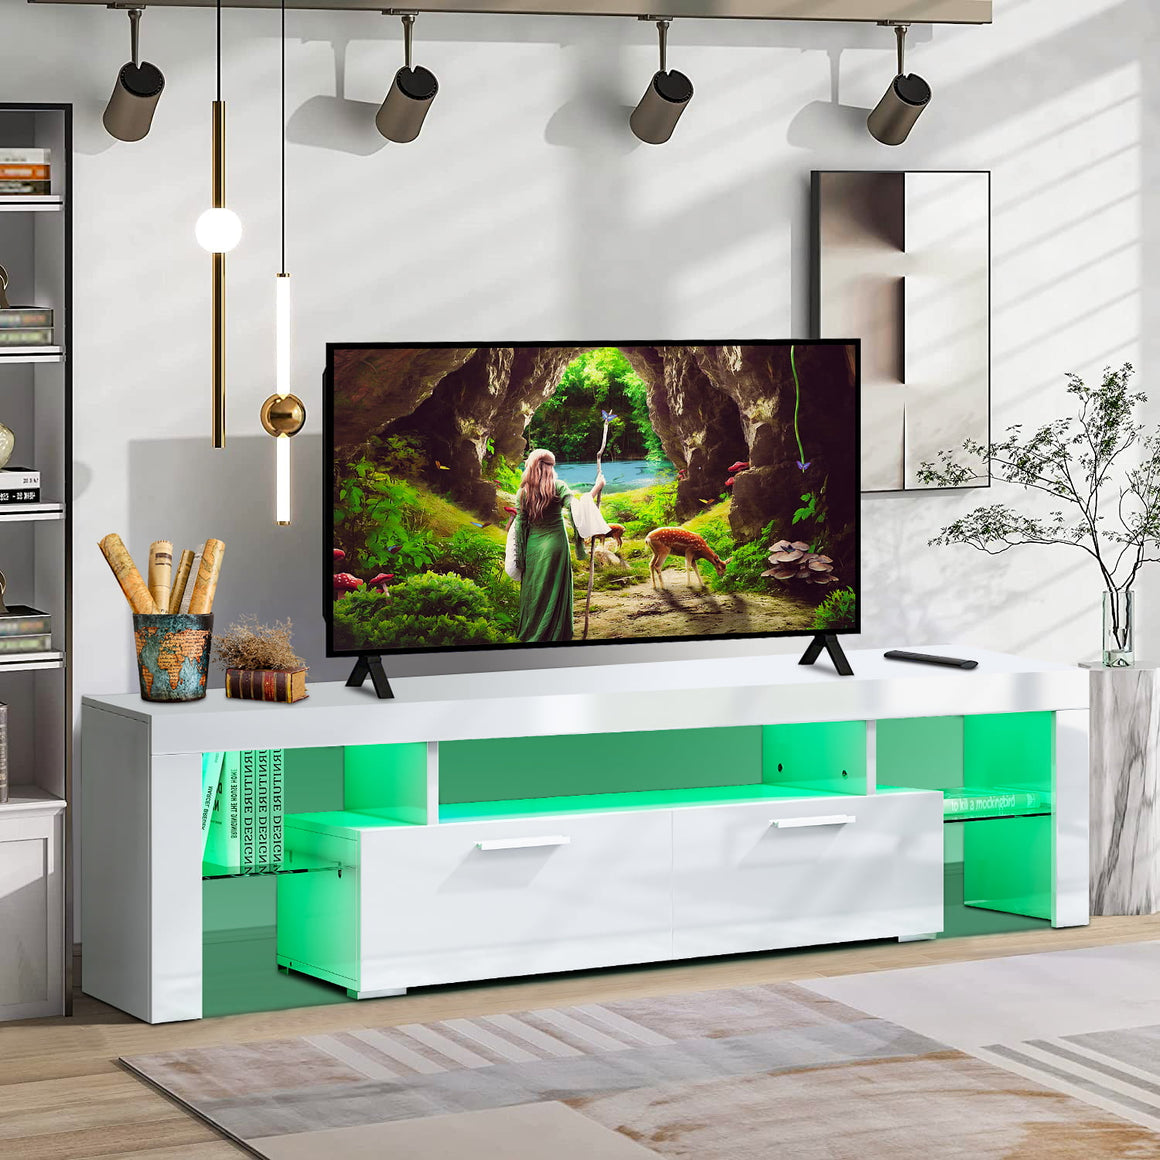 Black TV Stand with 16 Colors LED Remote Control Lights, TV Console Cabinet Table for TV up to 80"